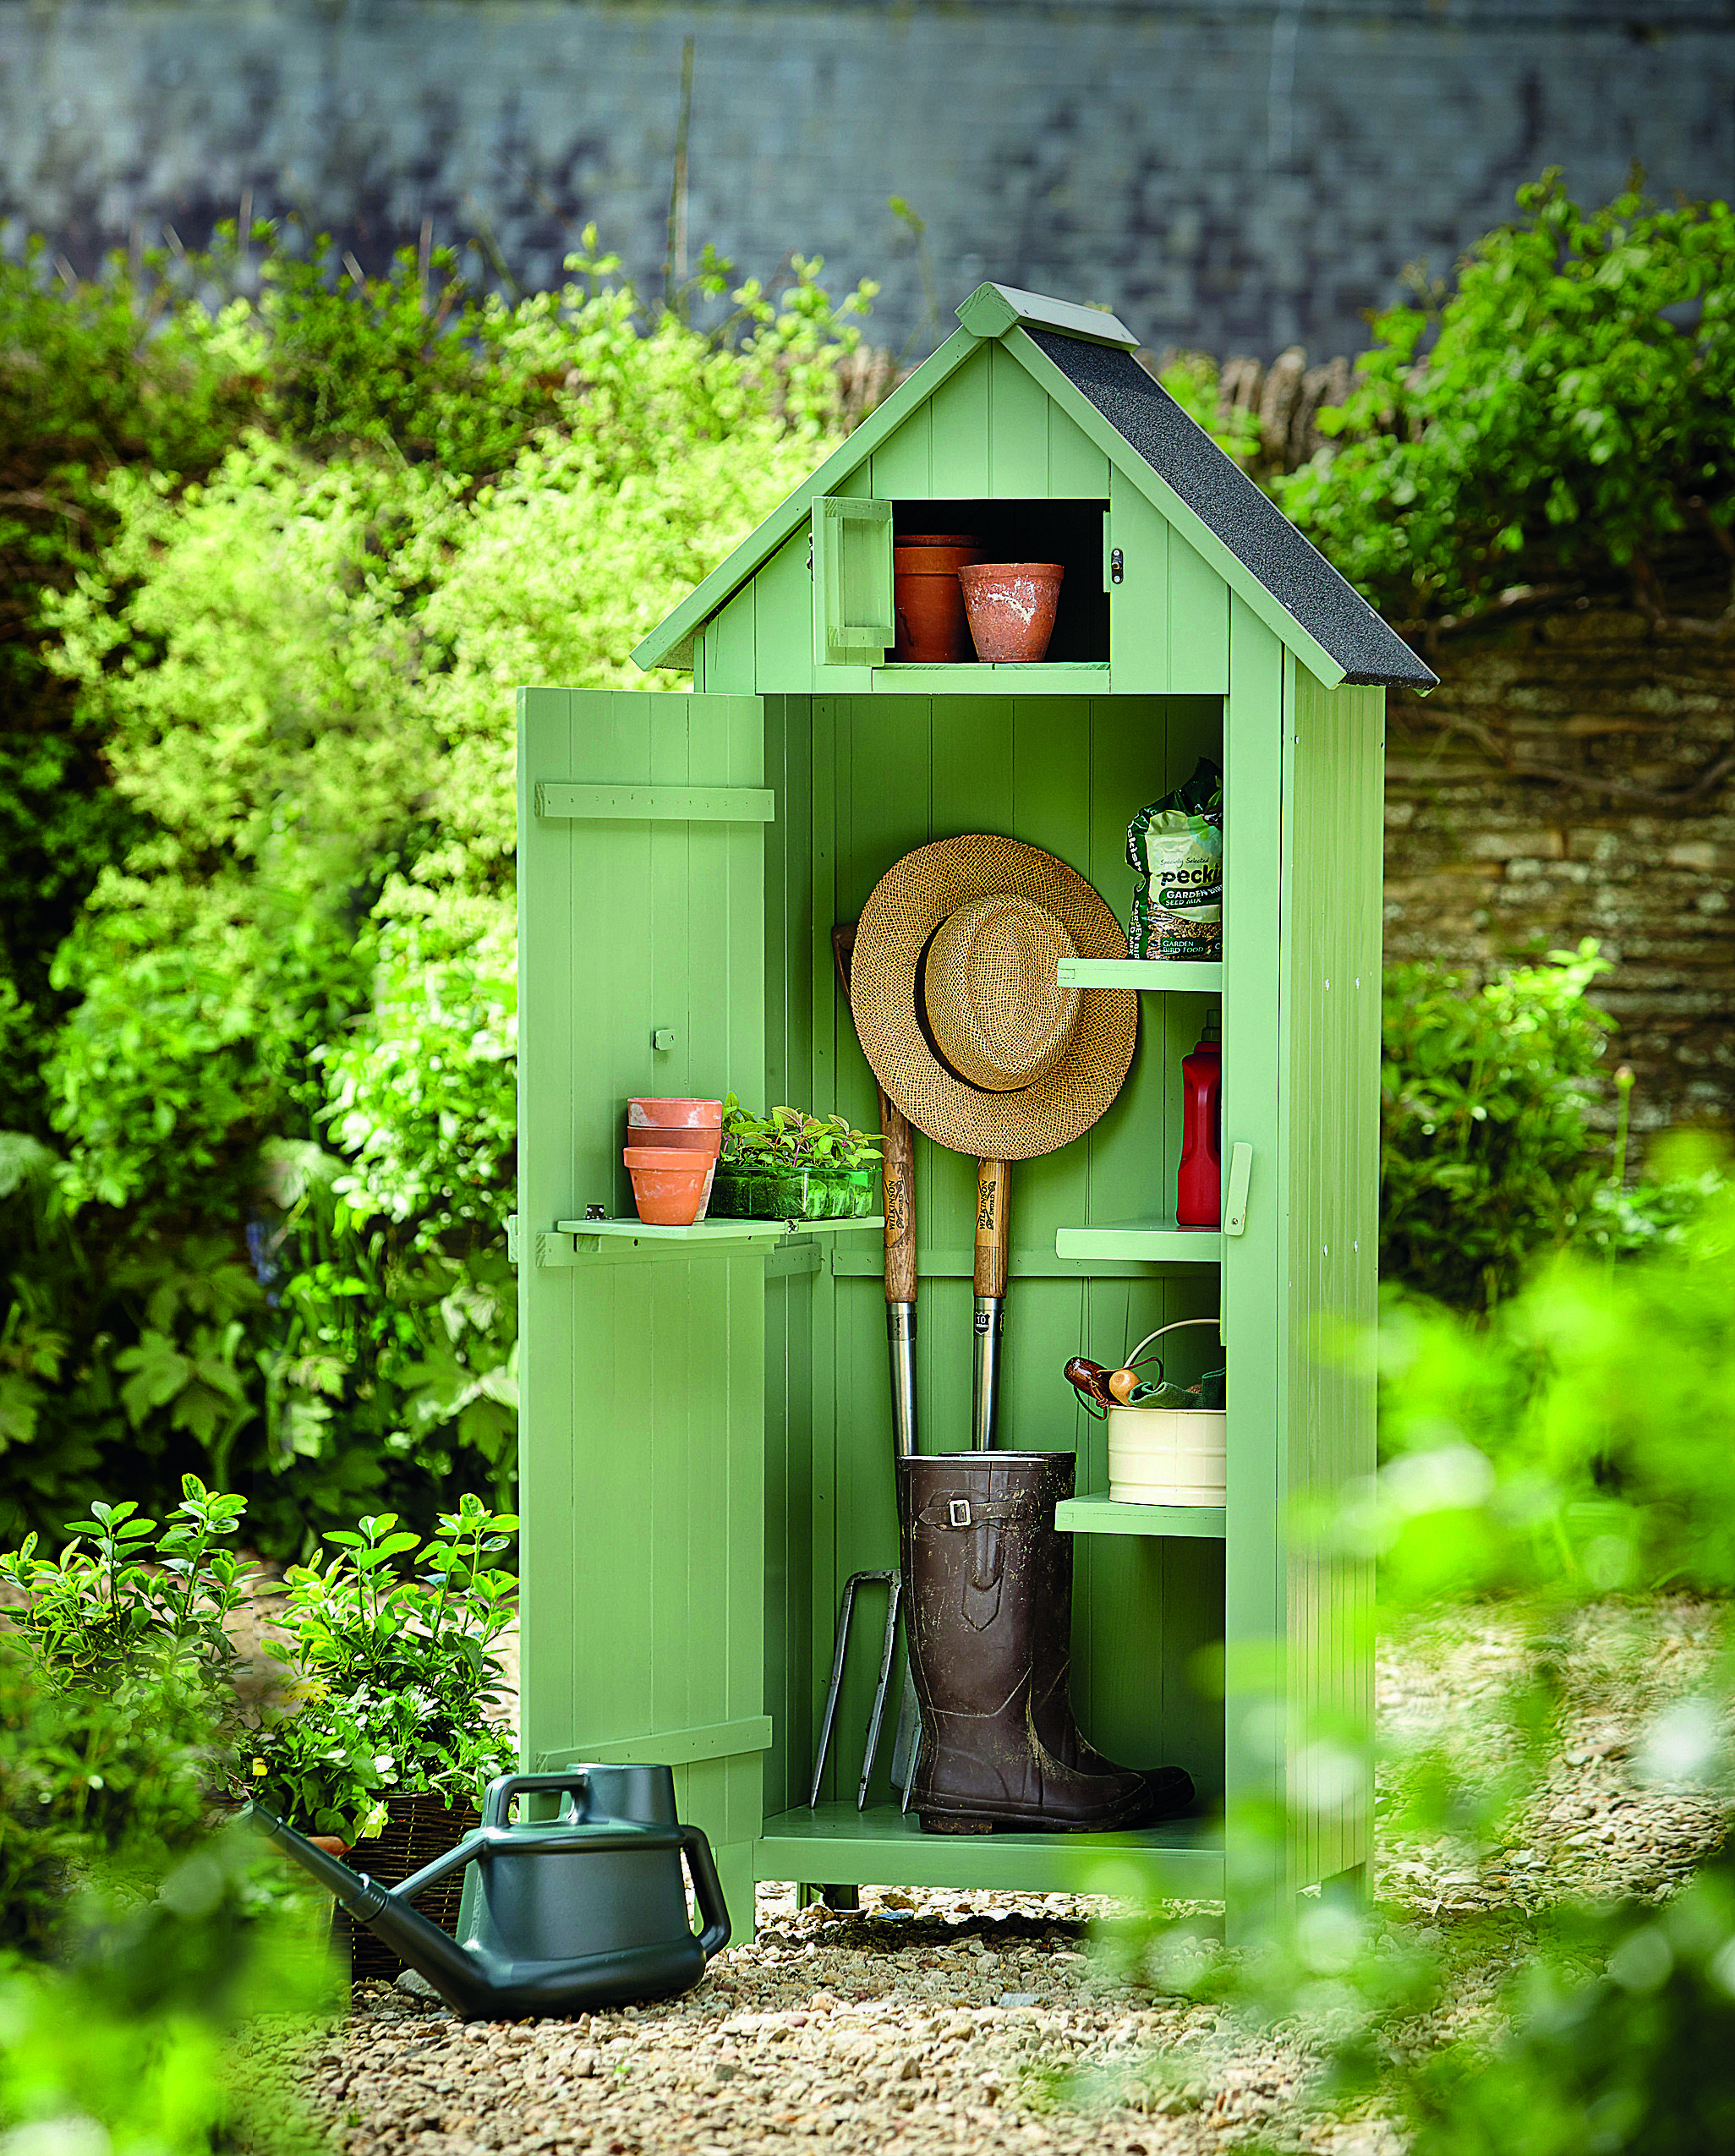 Compact Solutions for Garden Storage